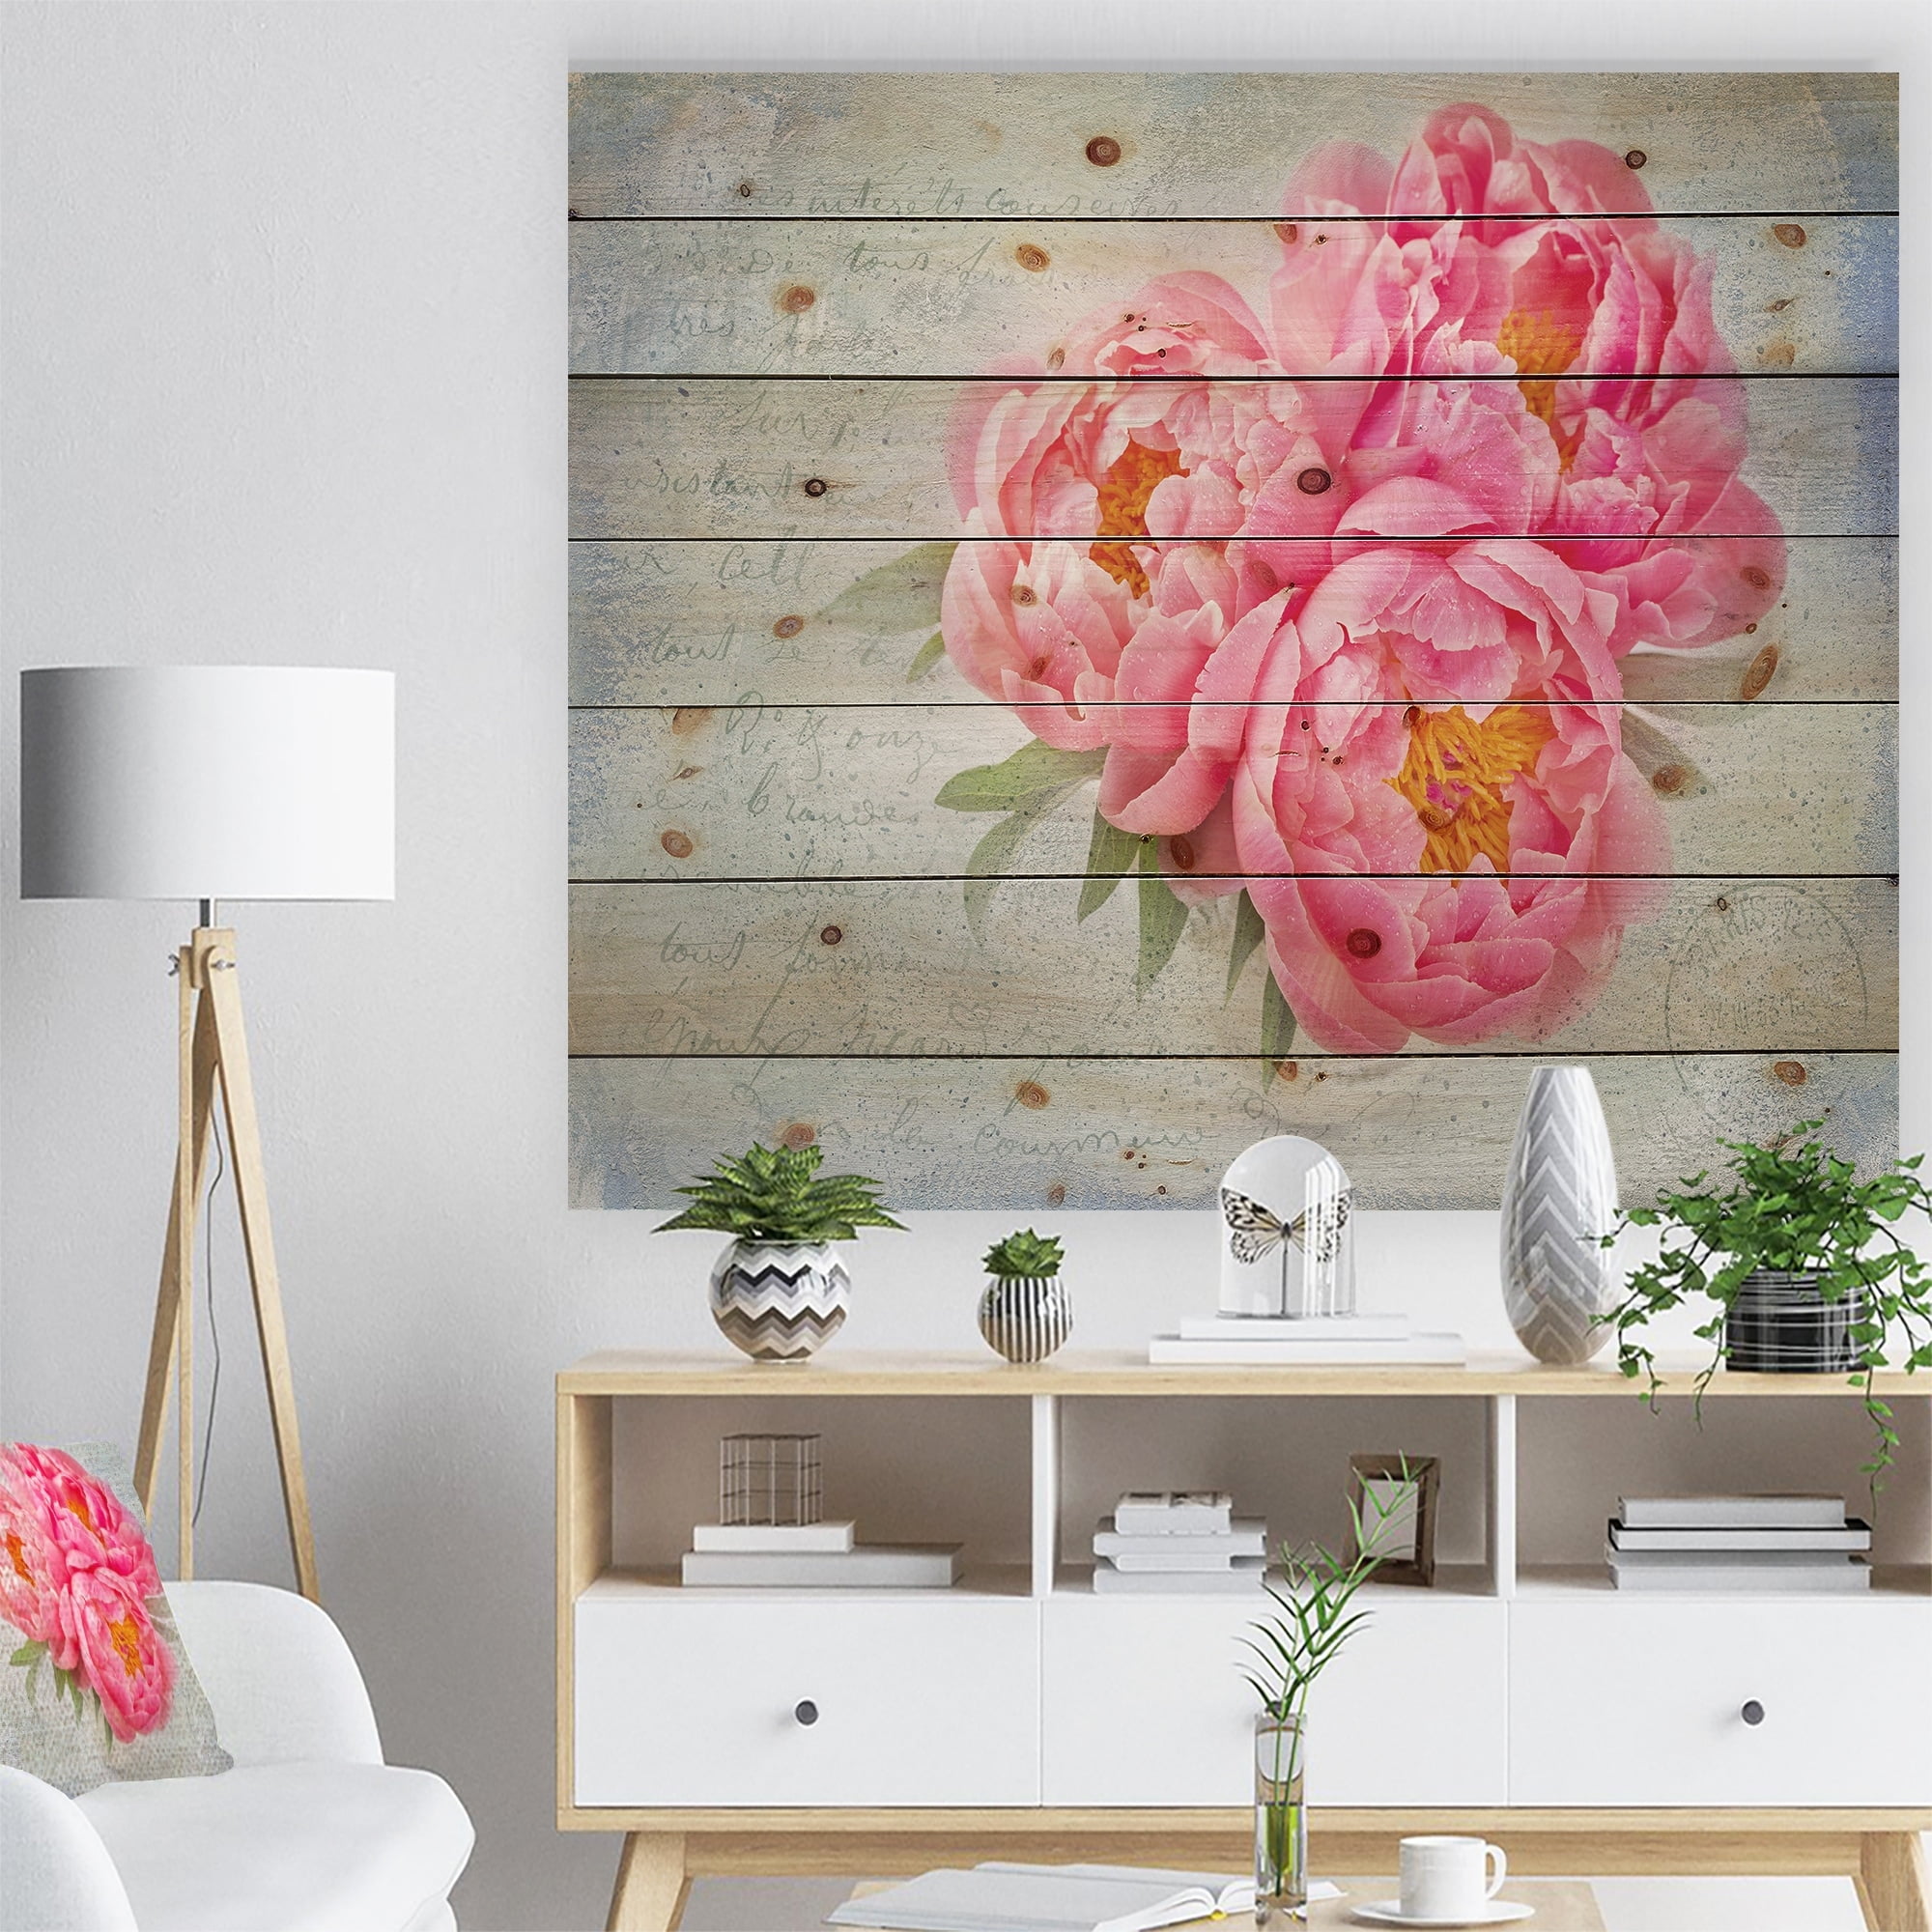 Rustic Red Peony Wall wooden hanging plaque/picture Fresh Flowers in the vase 